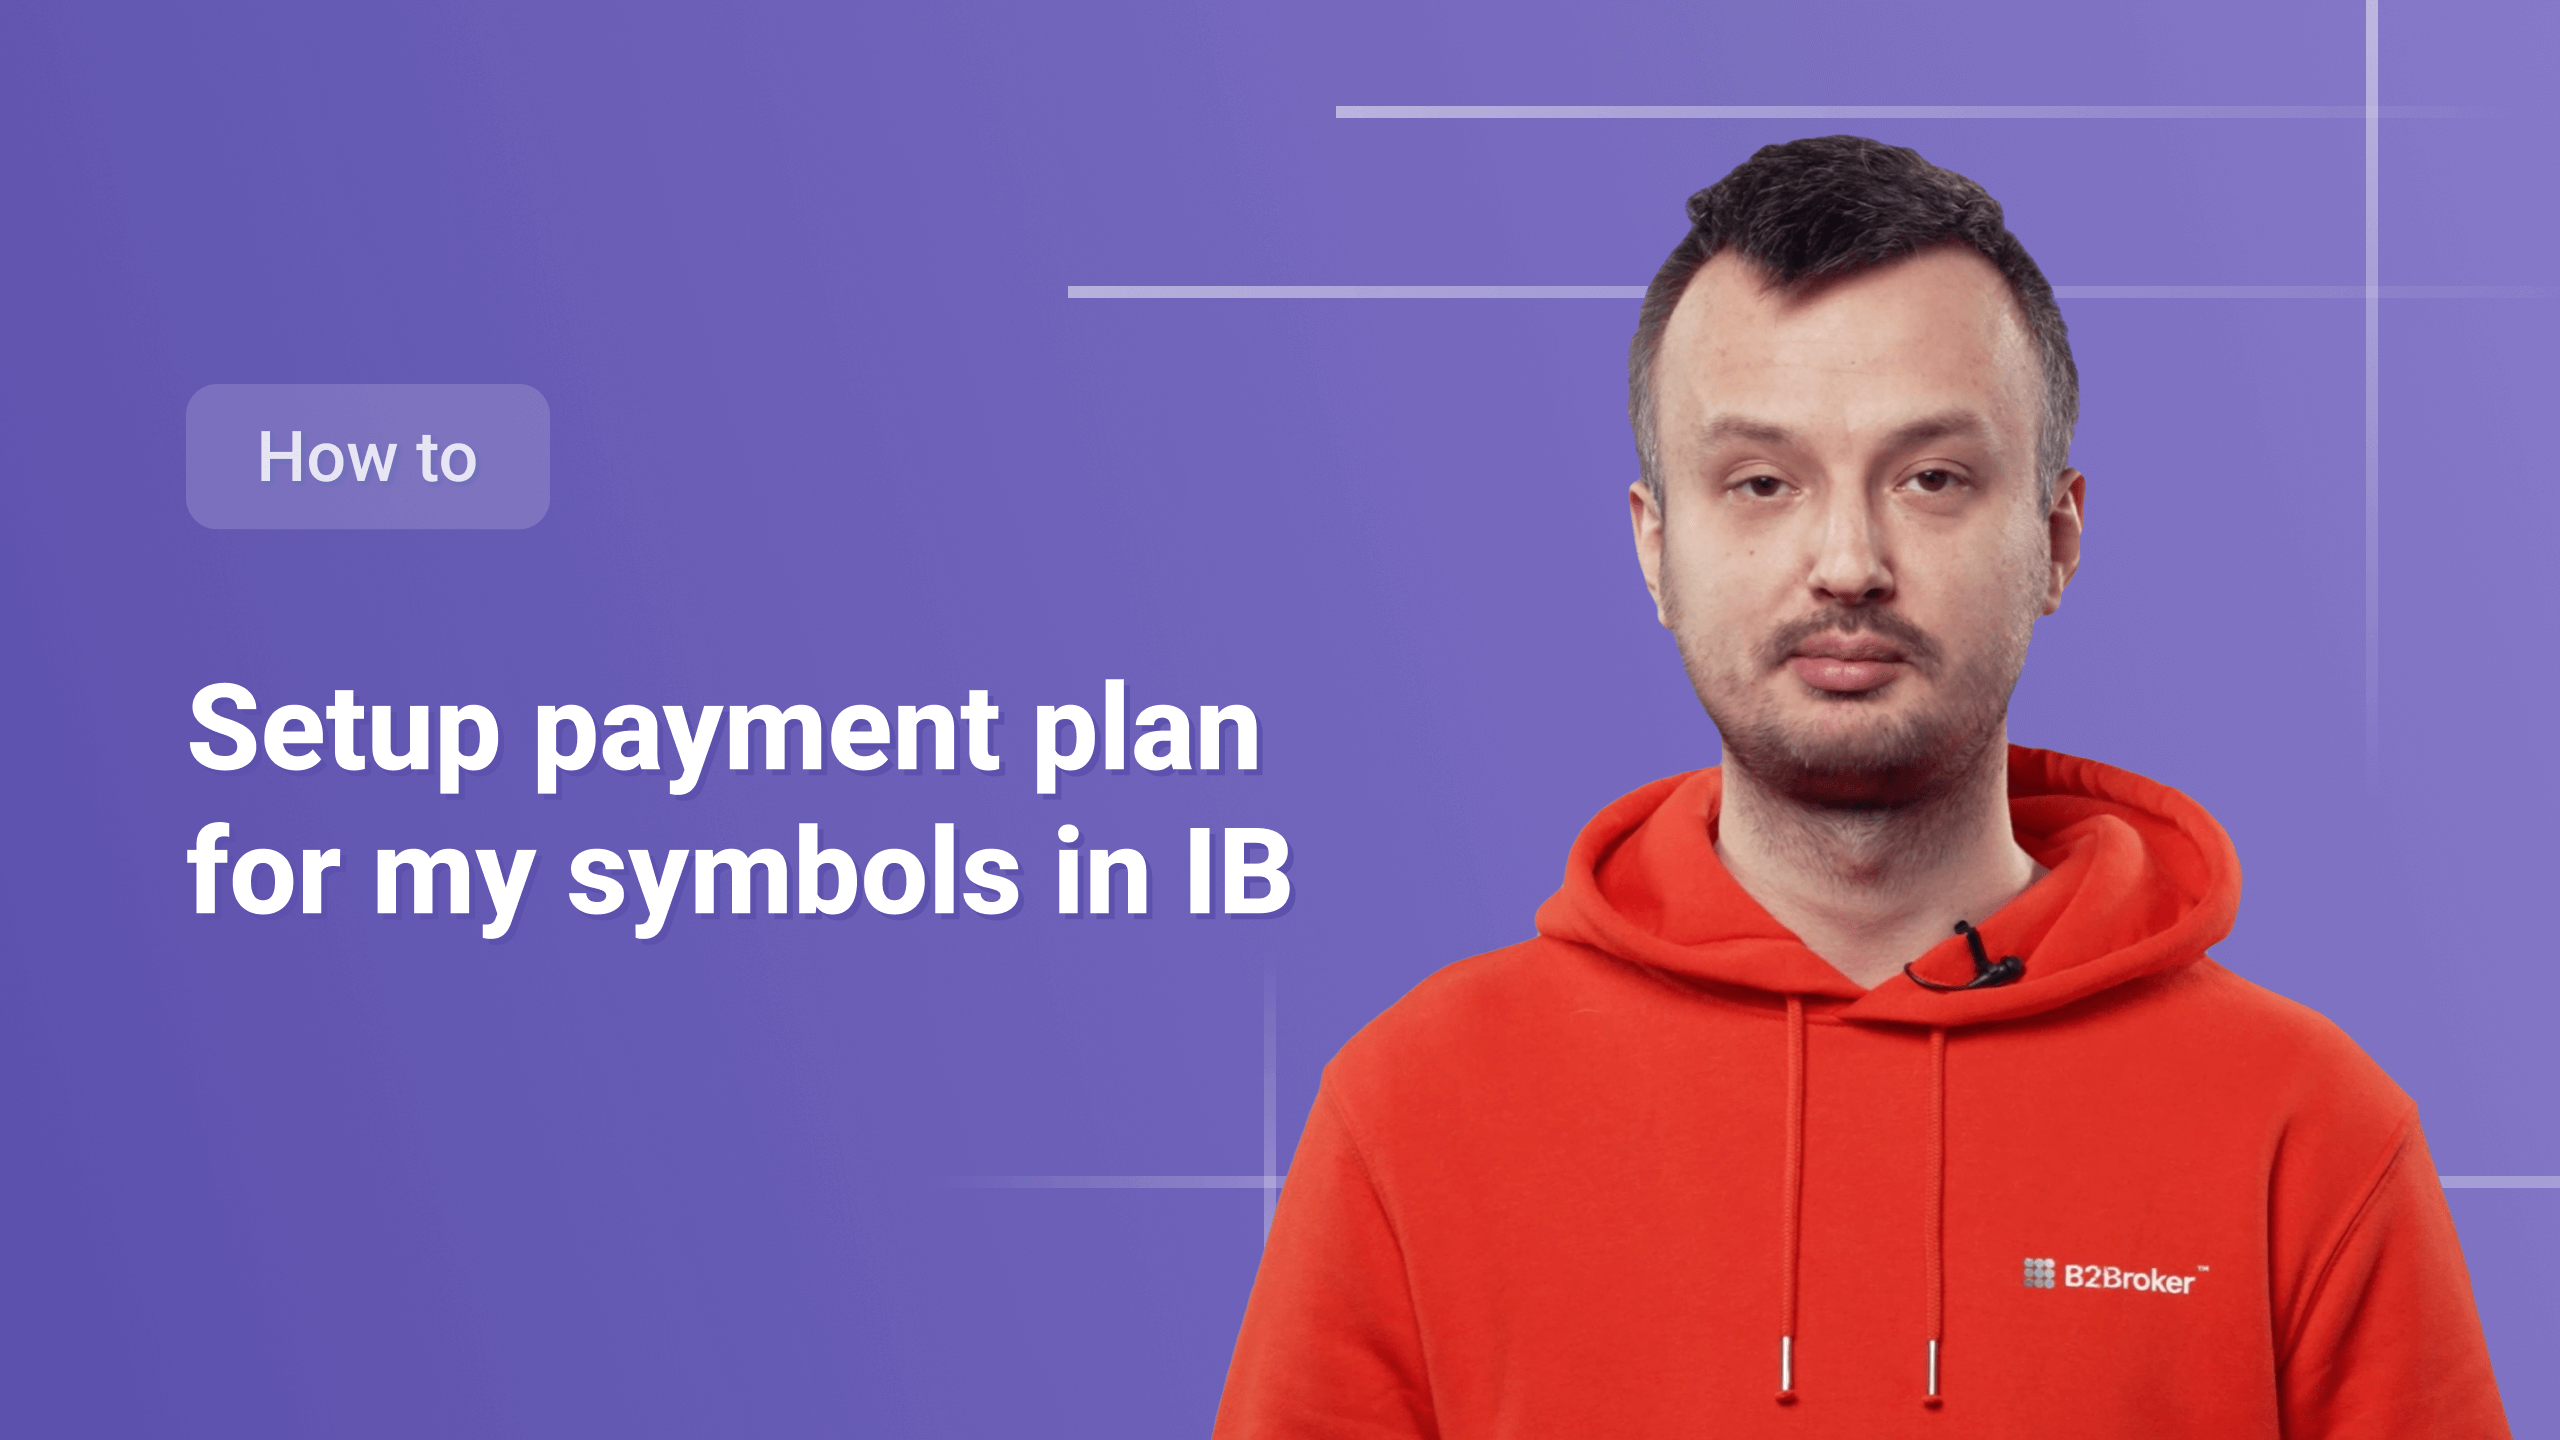 How to Setup a Payment Plan for My Symbols in IB?